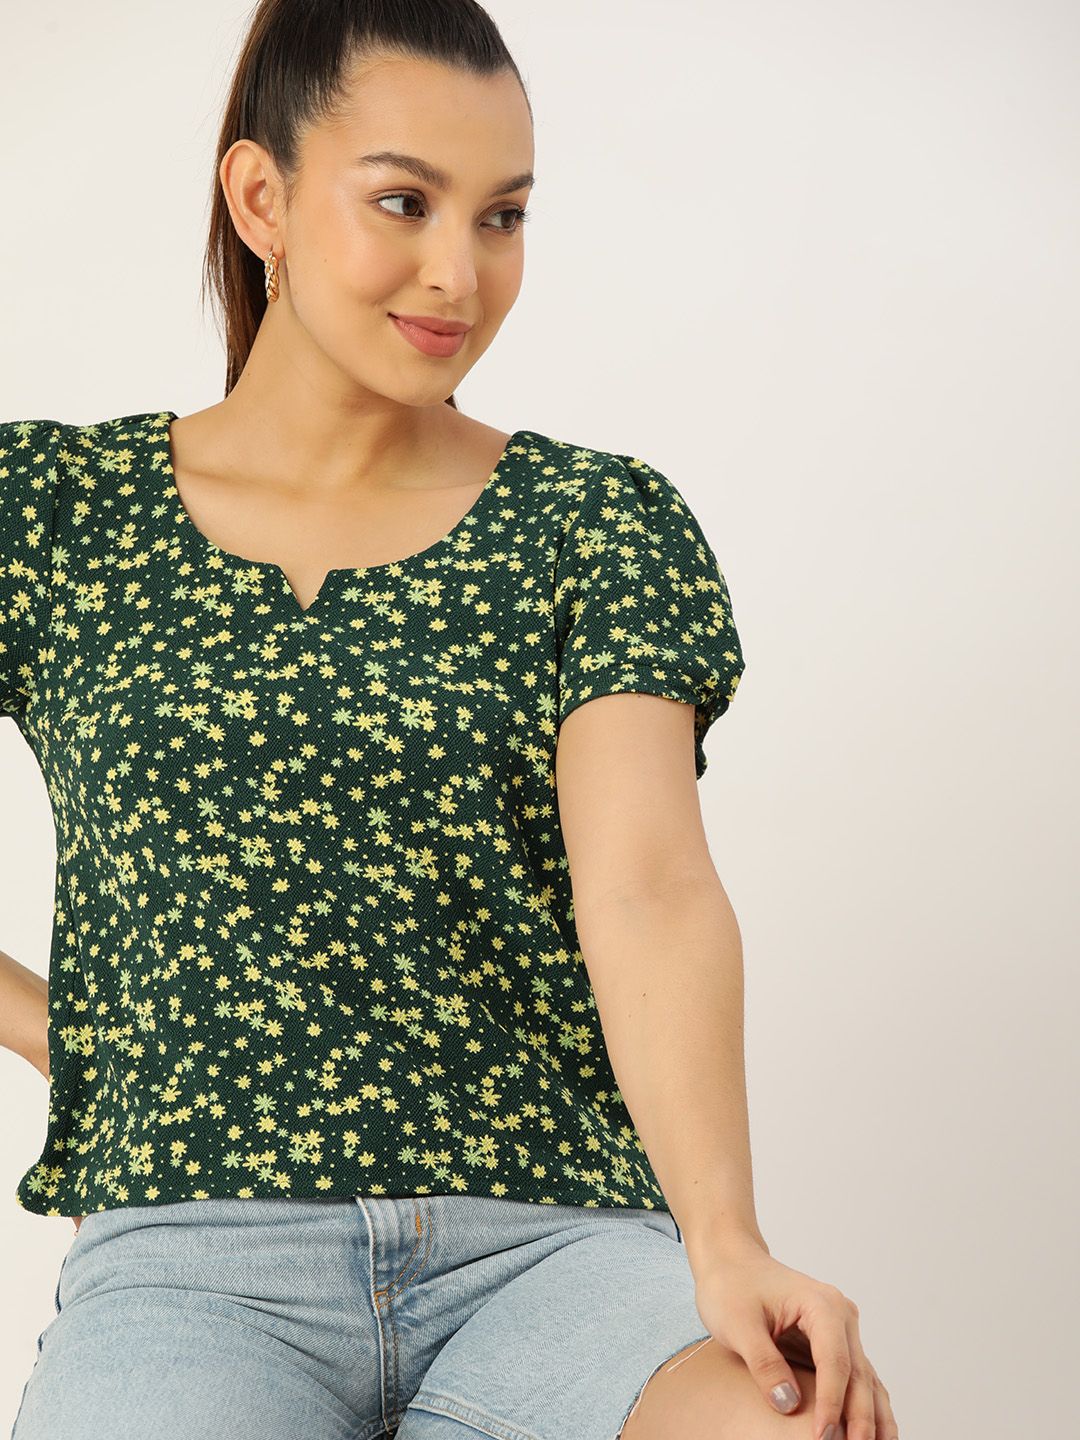 DressBerry Floral Print Top Price in India